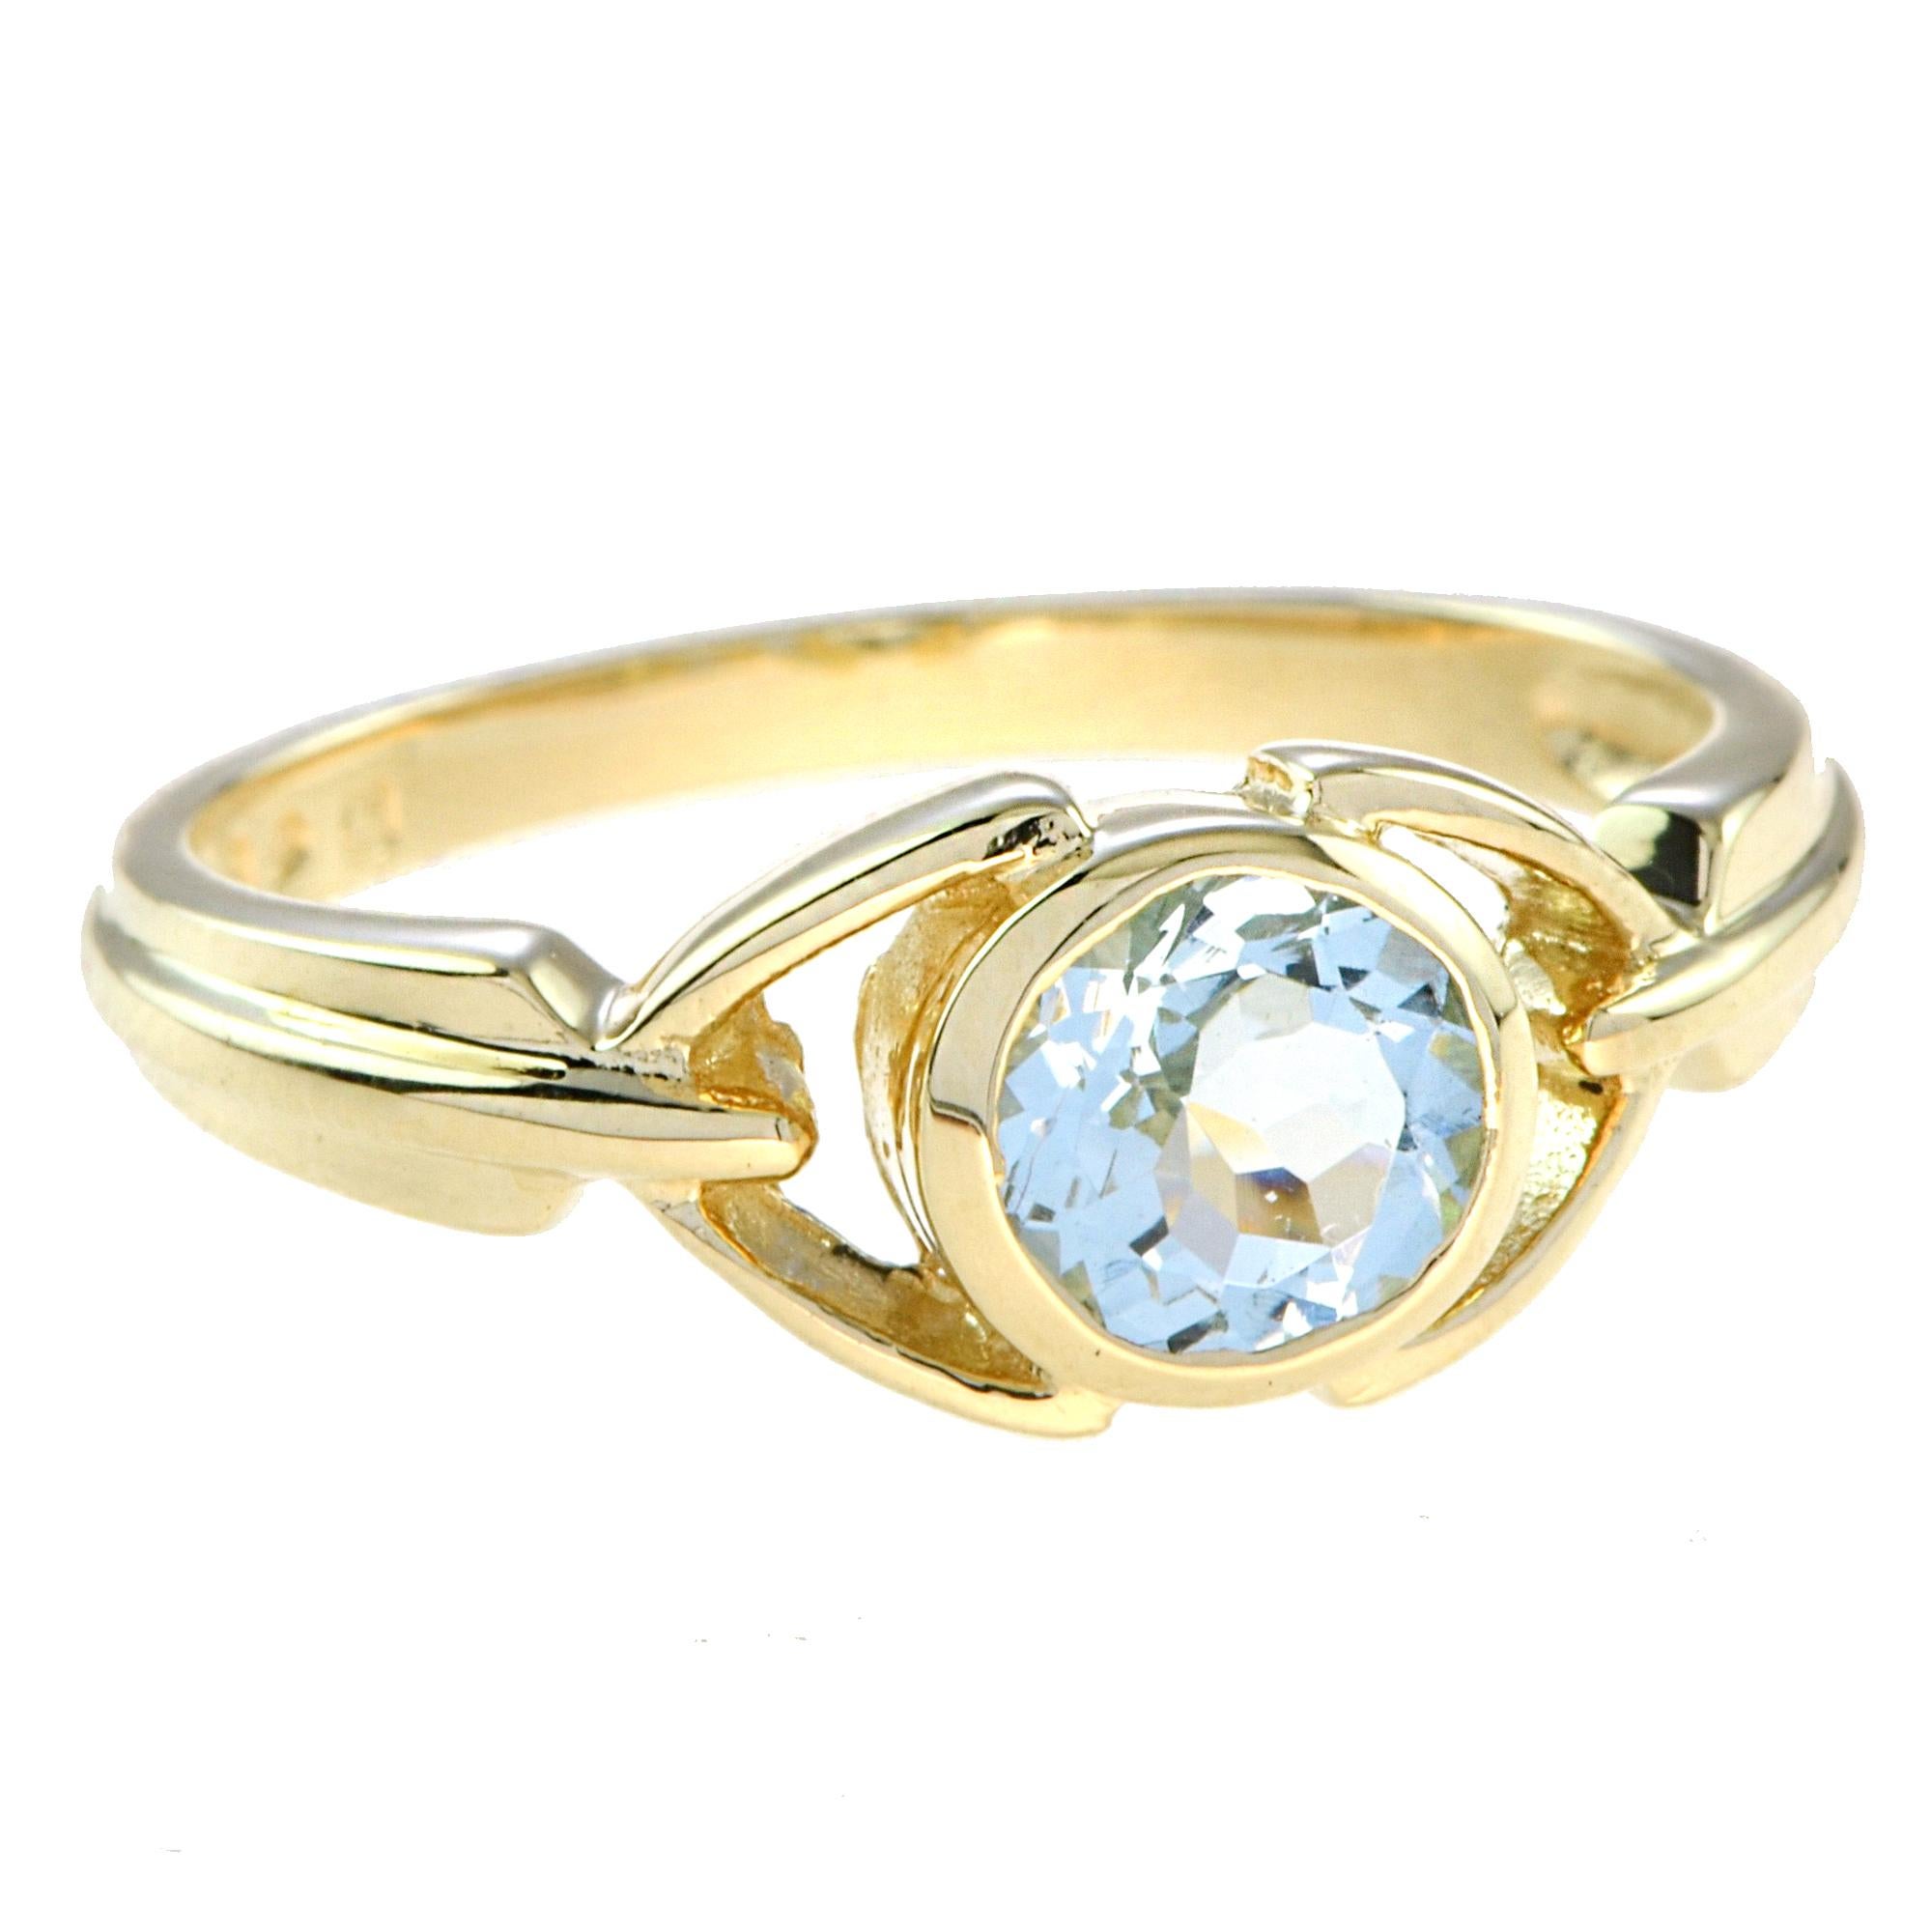 For Sale:  Vintage Style Round Aquamarine Bezel Set Ring in 14K Yellow Gold 3